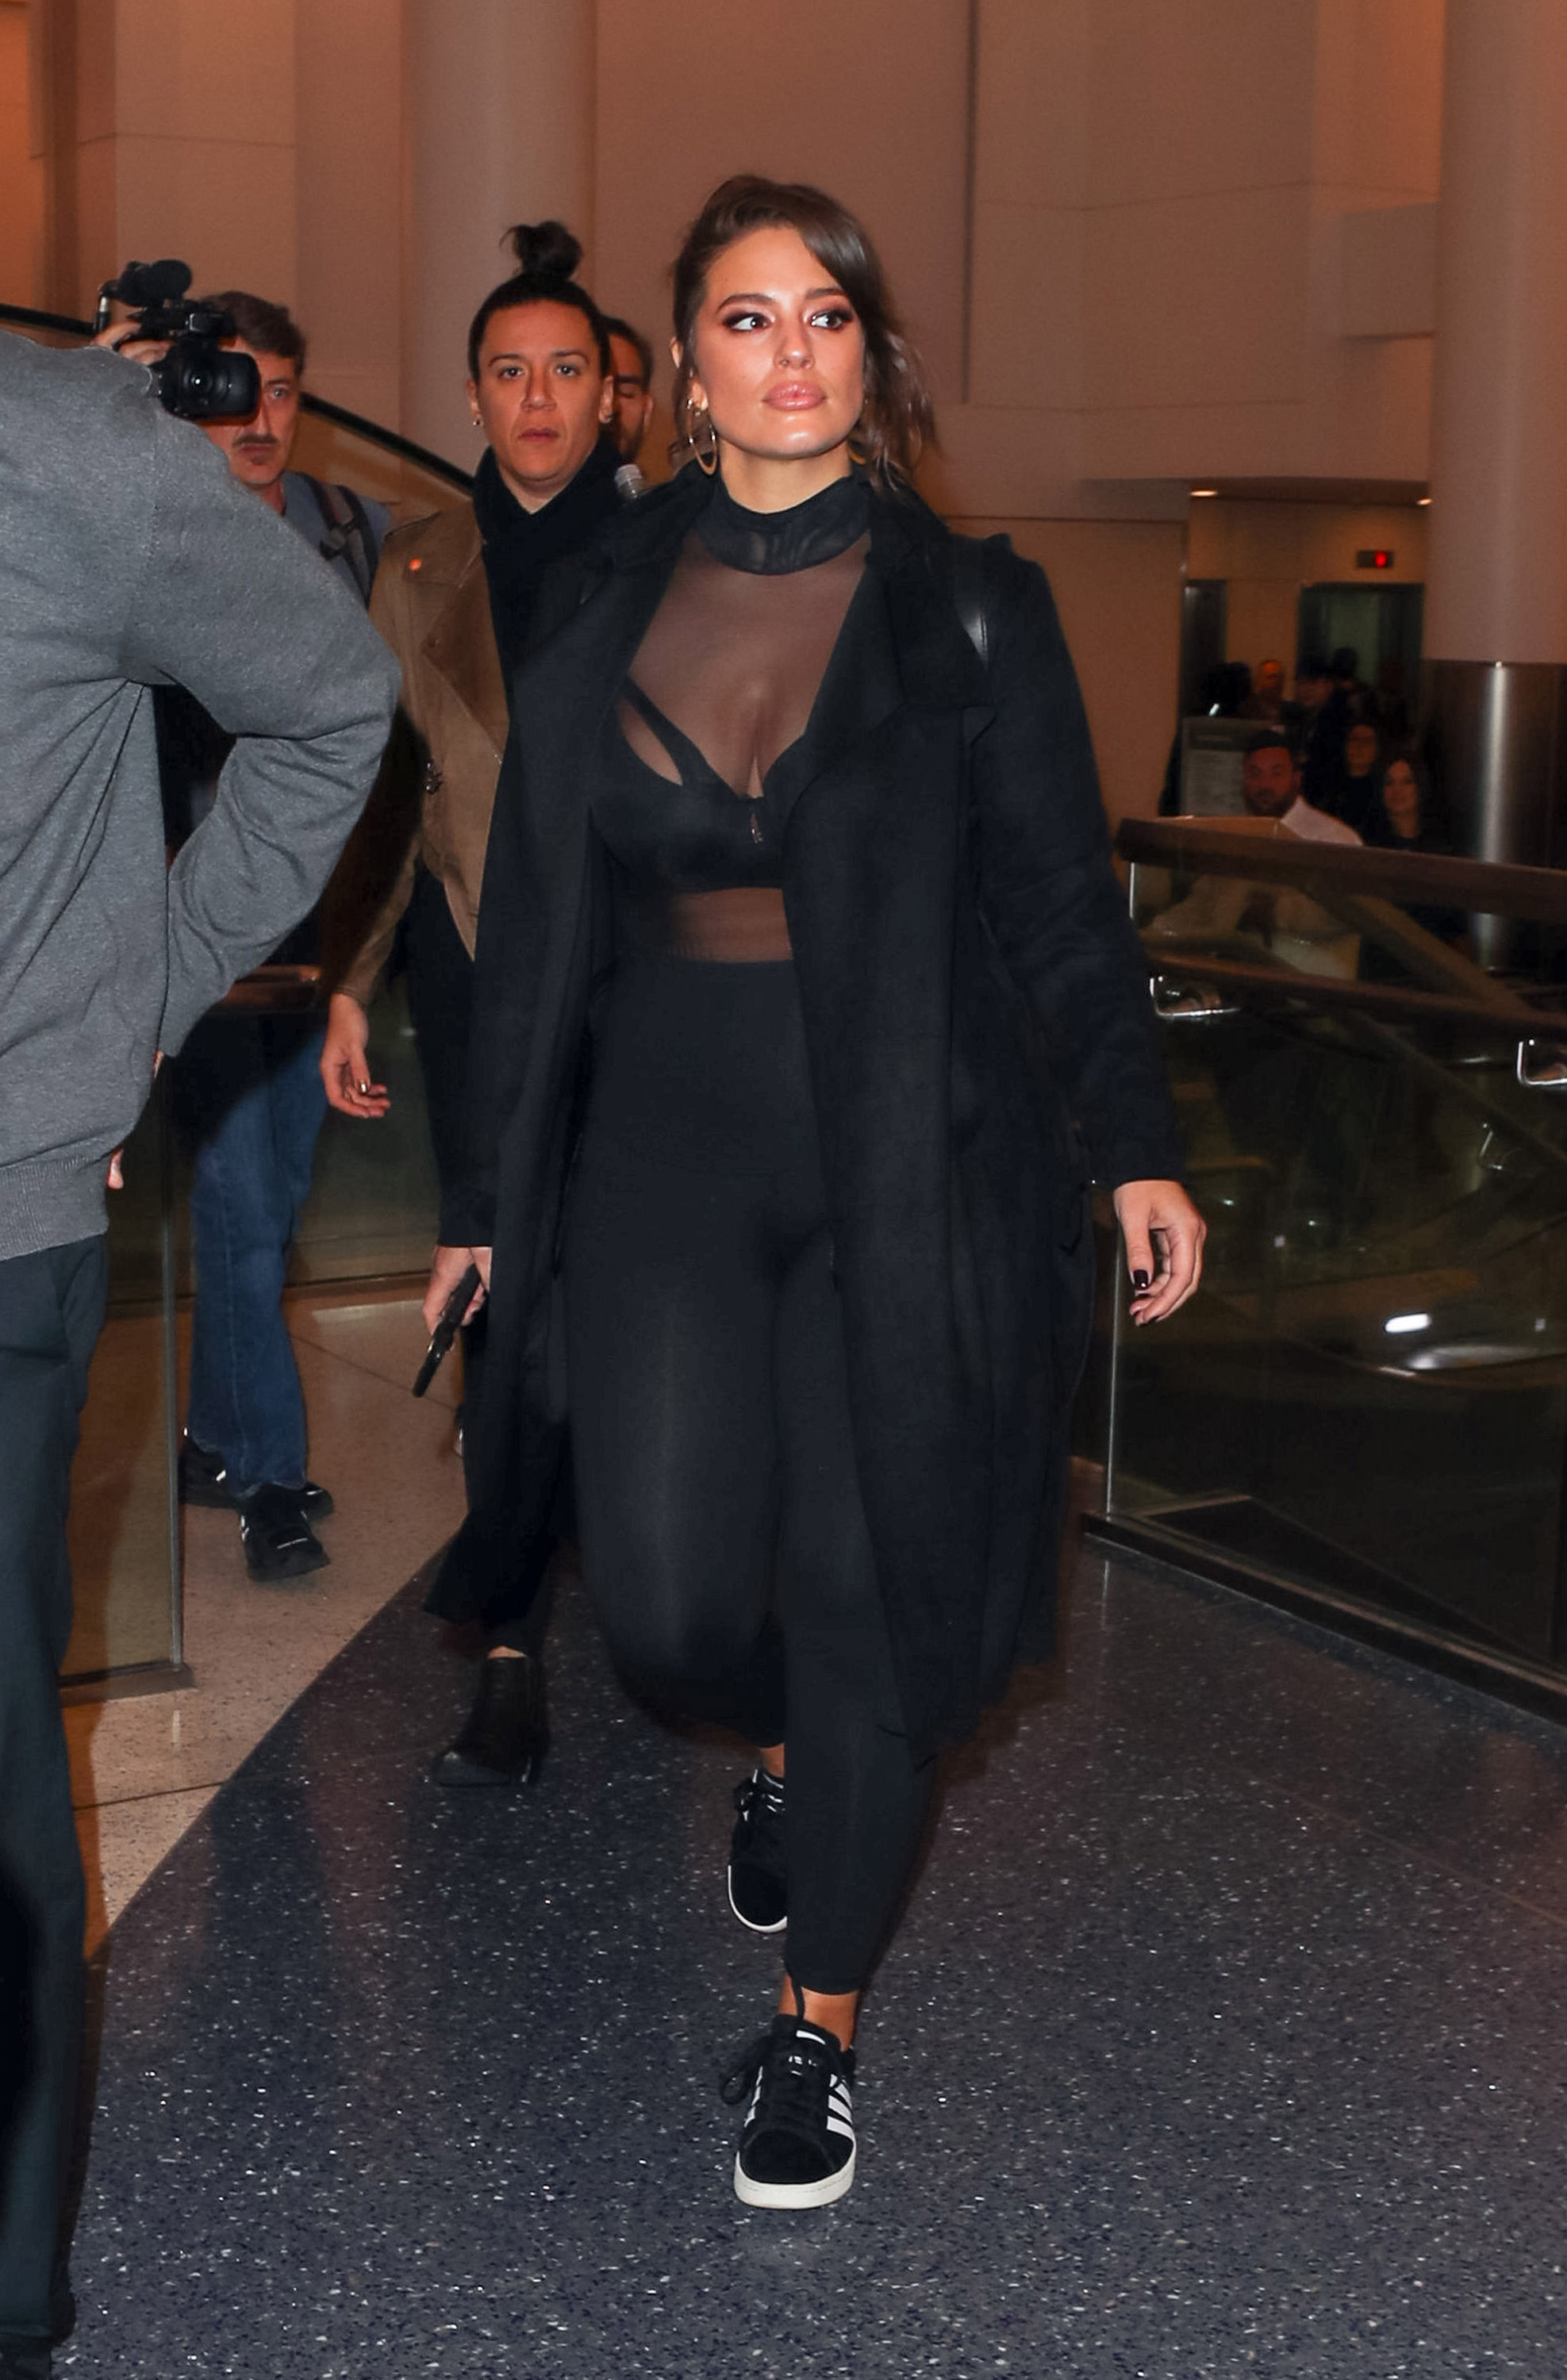 Fashion Horoscopes: The Signs as Celebrity Airport Looks - GARAGE